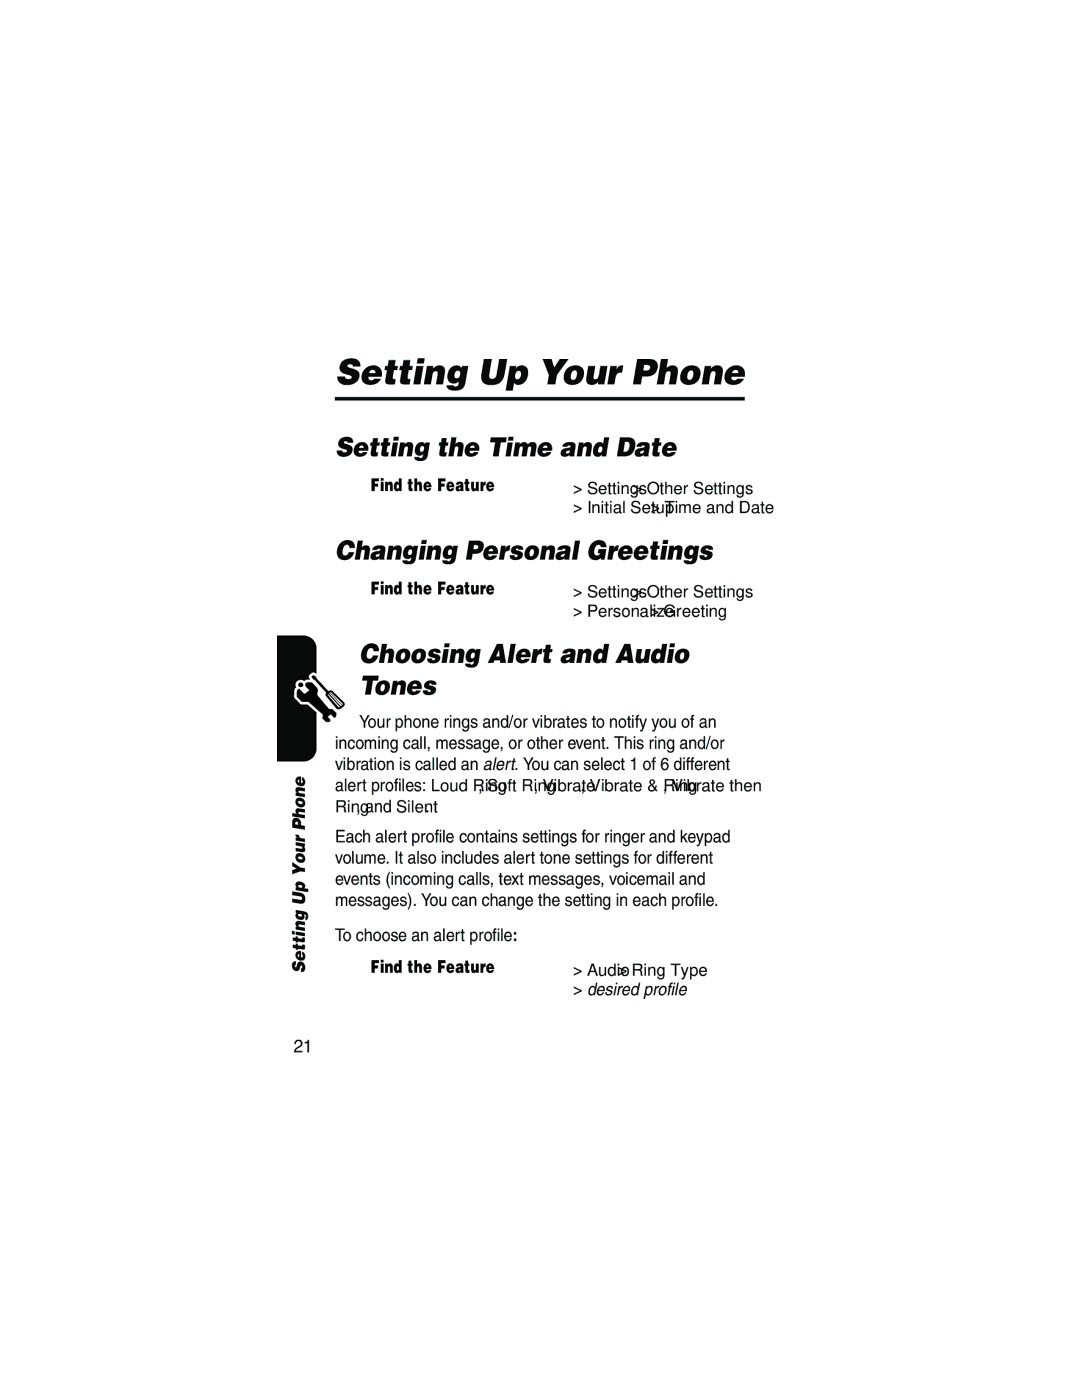 Motorola V173 Setting Up Your Phone, Setting the Time and Date, Changing Personal Greetings, To choose an alert profile 